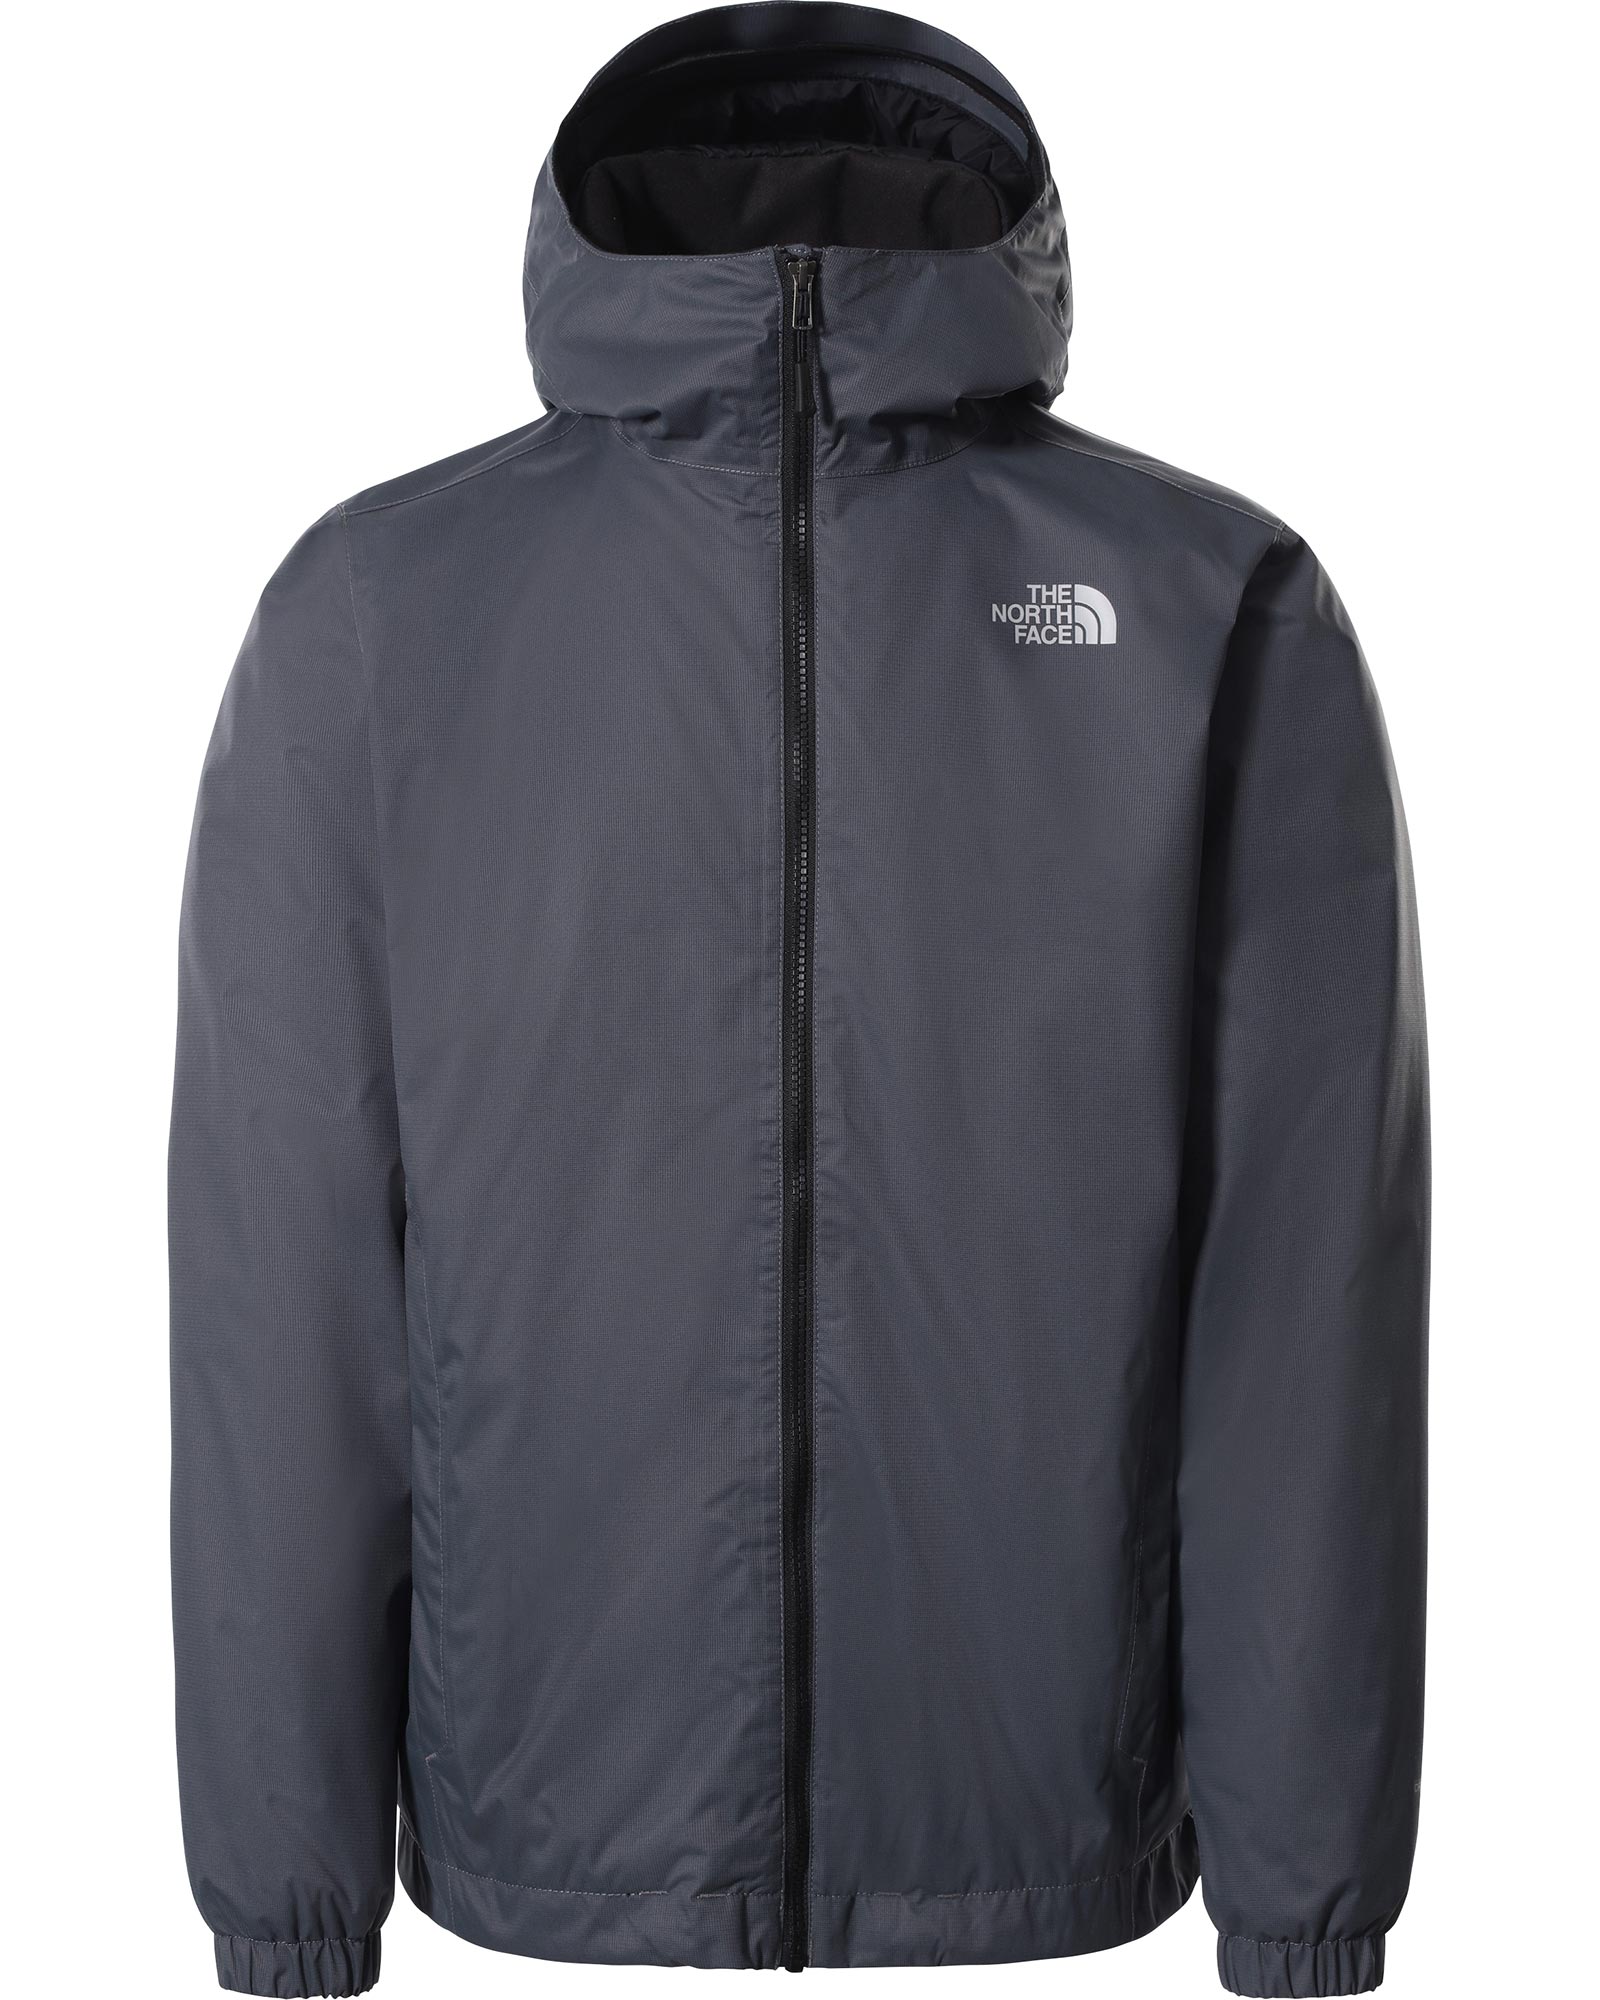 The North Face Quest DryVent Men’s Insulated Jacket - Vanadis Grey M